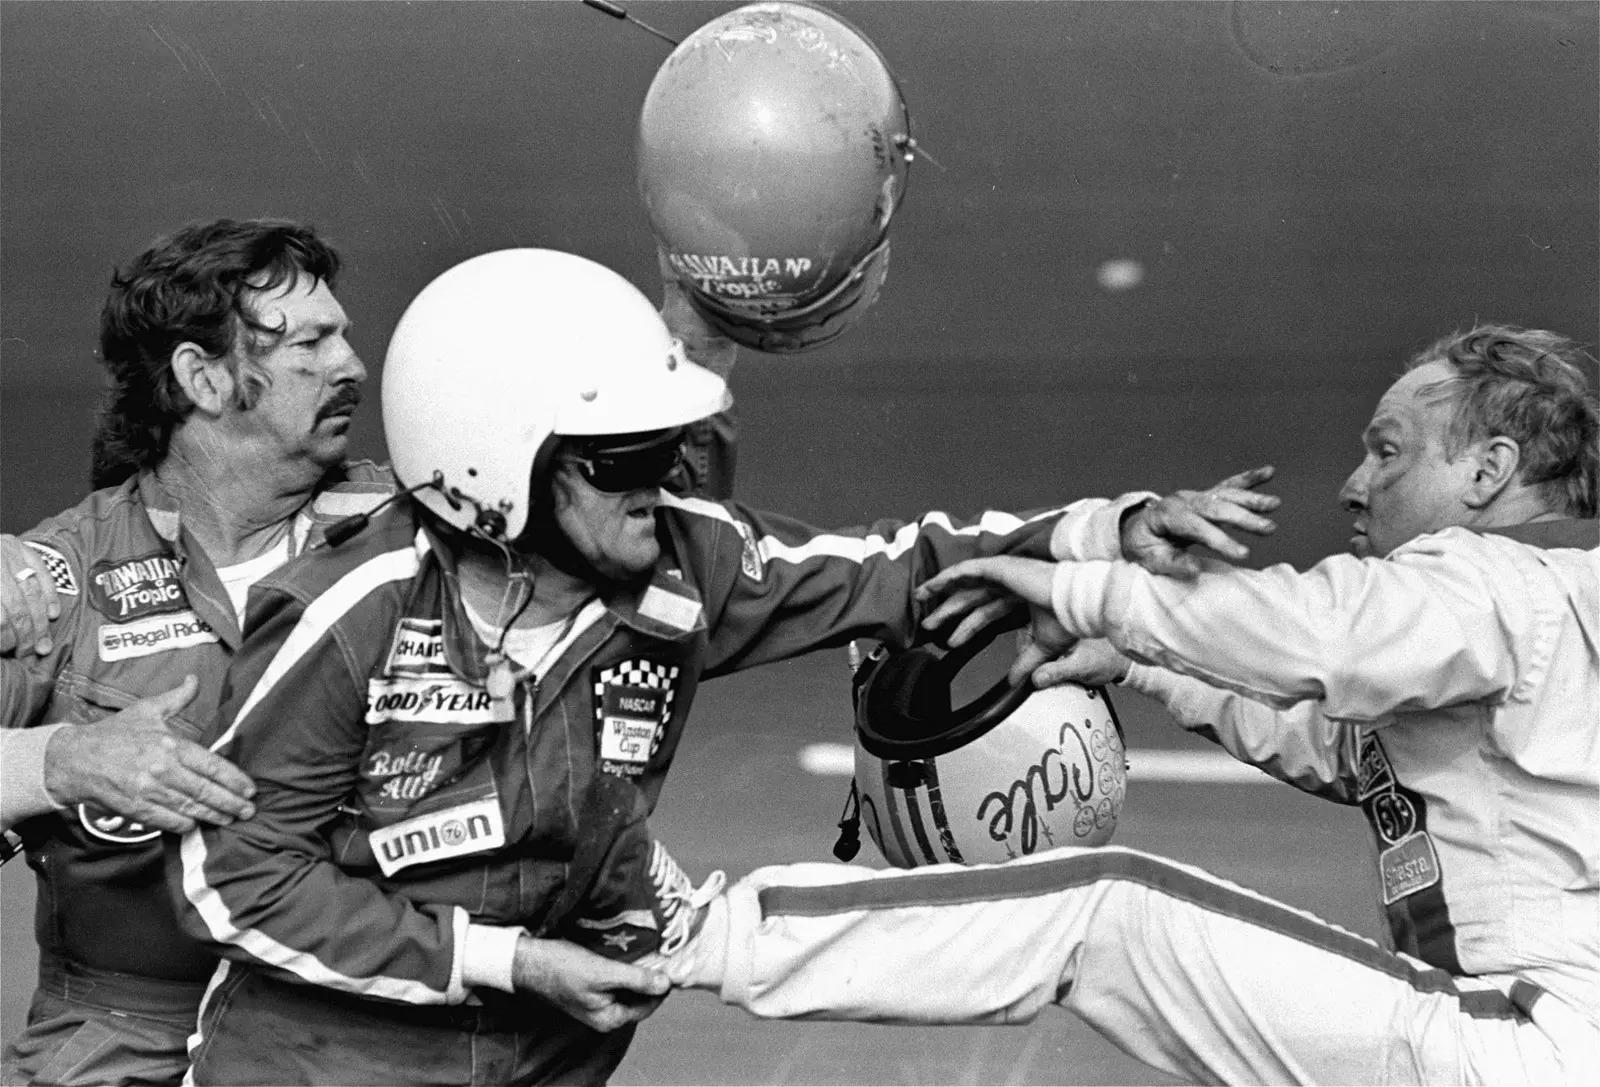 FILE - Bobby Allison, center, holds race driver Cale Yarborough's foot after Yarborough, right, kicked him following the Daytona 500 auto race in Daytona Beach, Fla., Feb. 18, 1979. (AP Photo/Ric Feld, File)